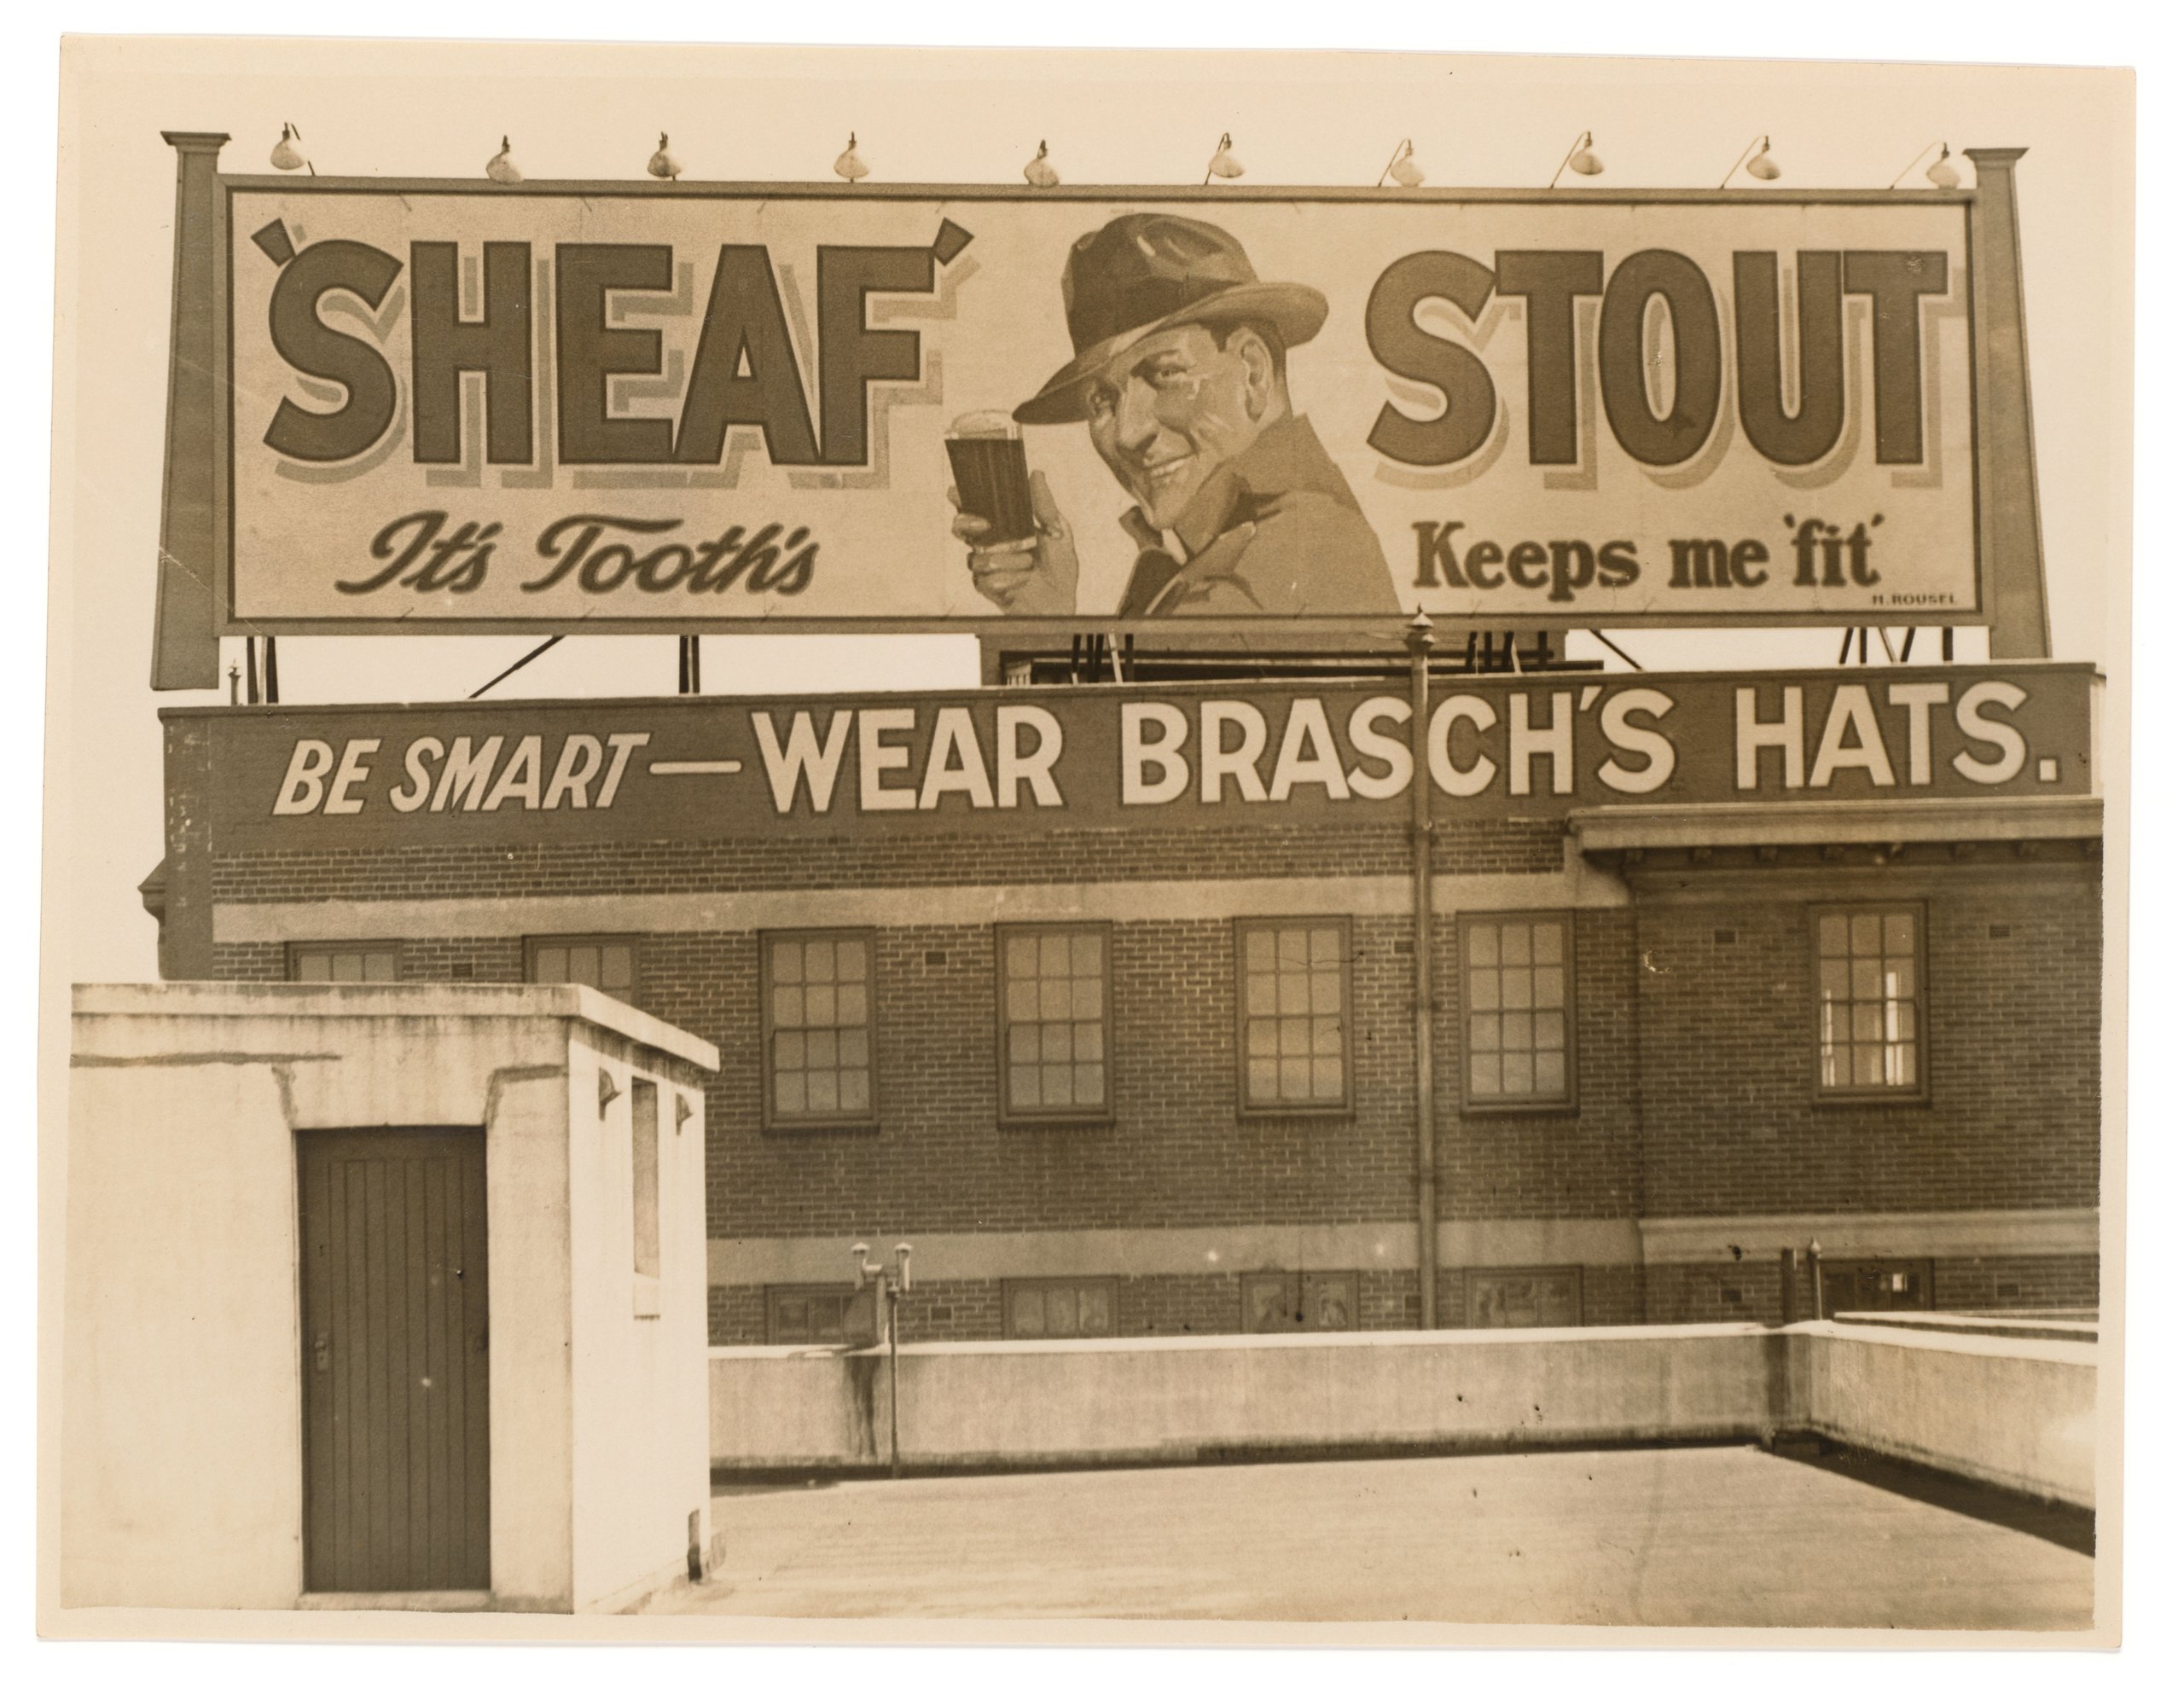 Photograph of billboard advertising Tooth's Sheaf Stout